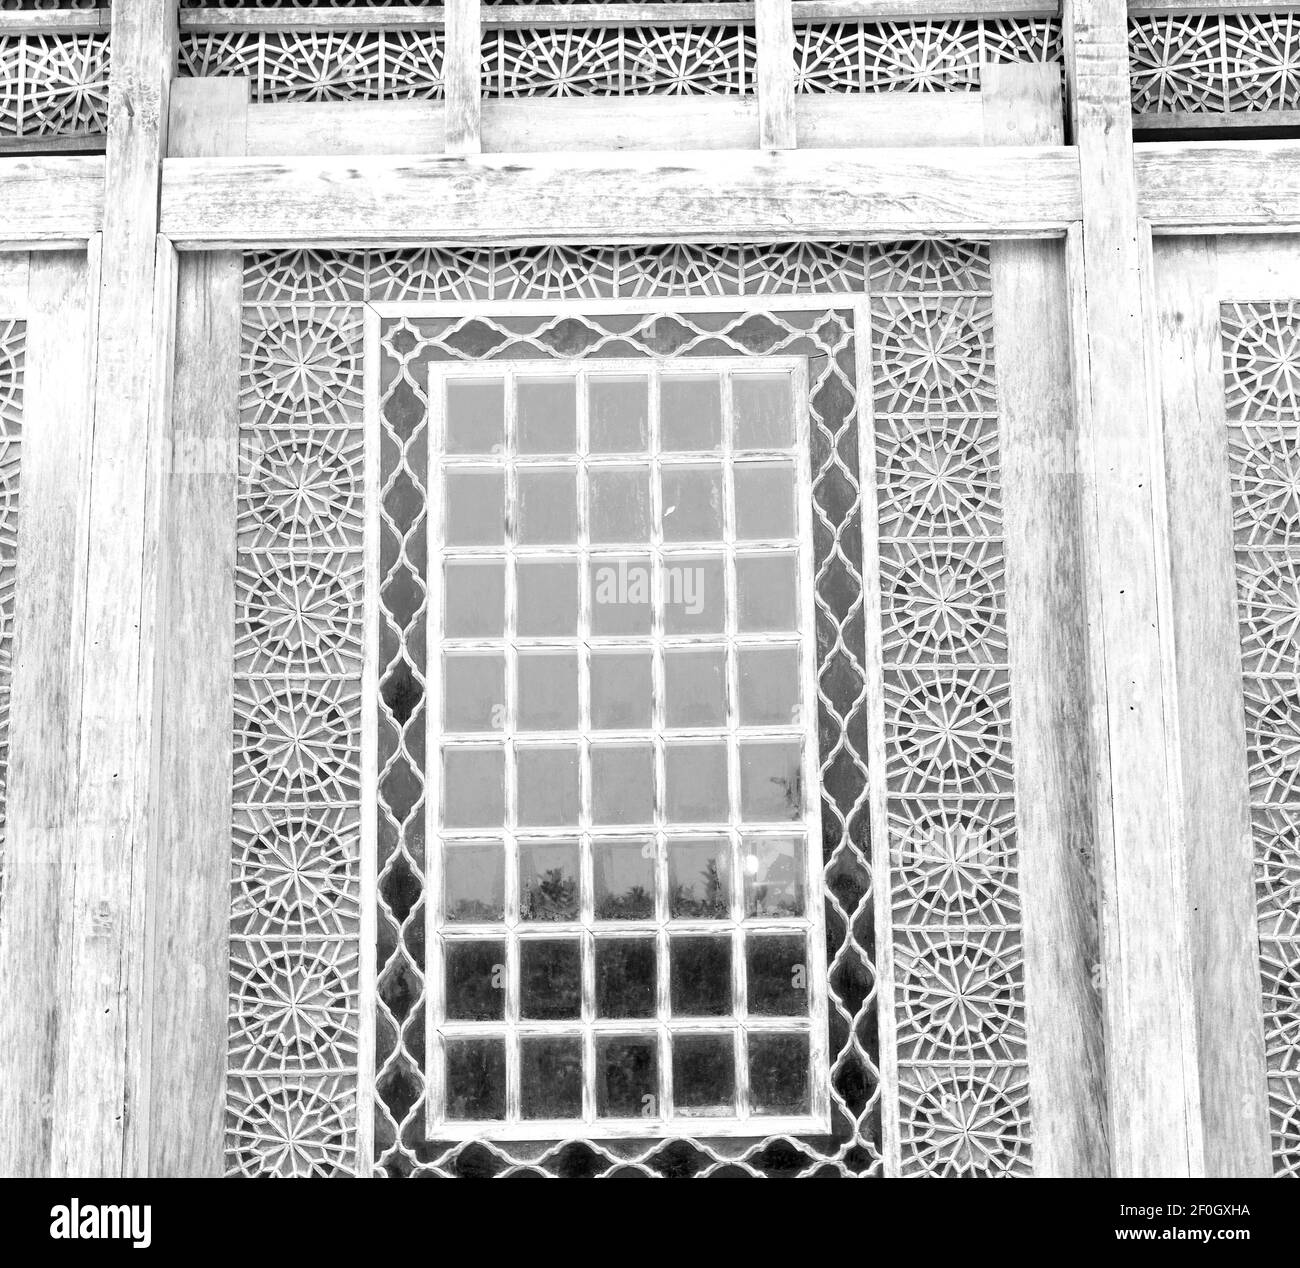 In iran  the old   architecture   window Stock Photo